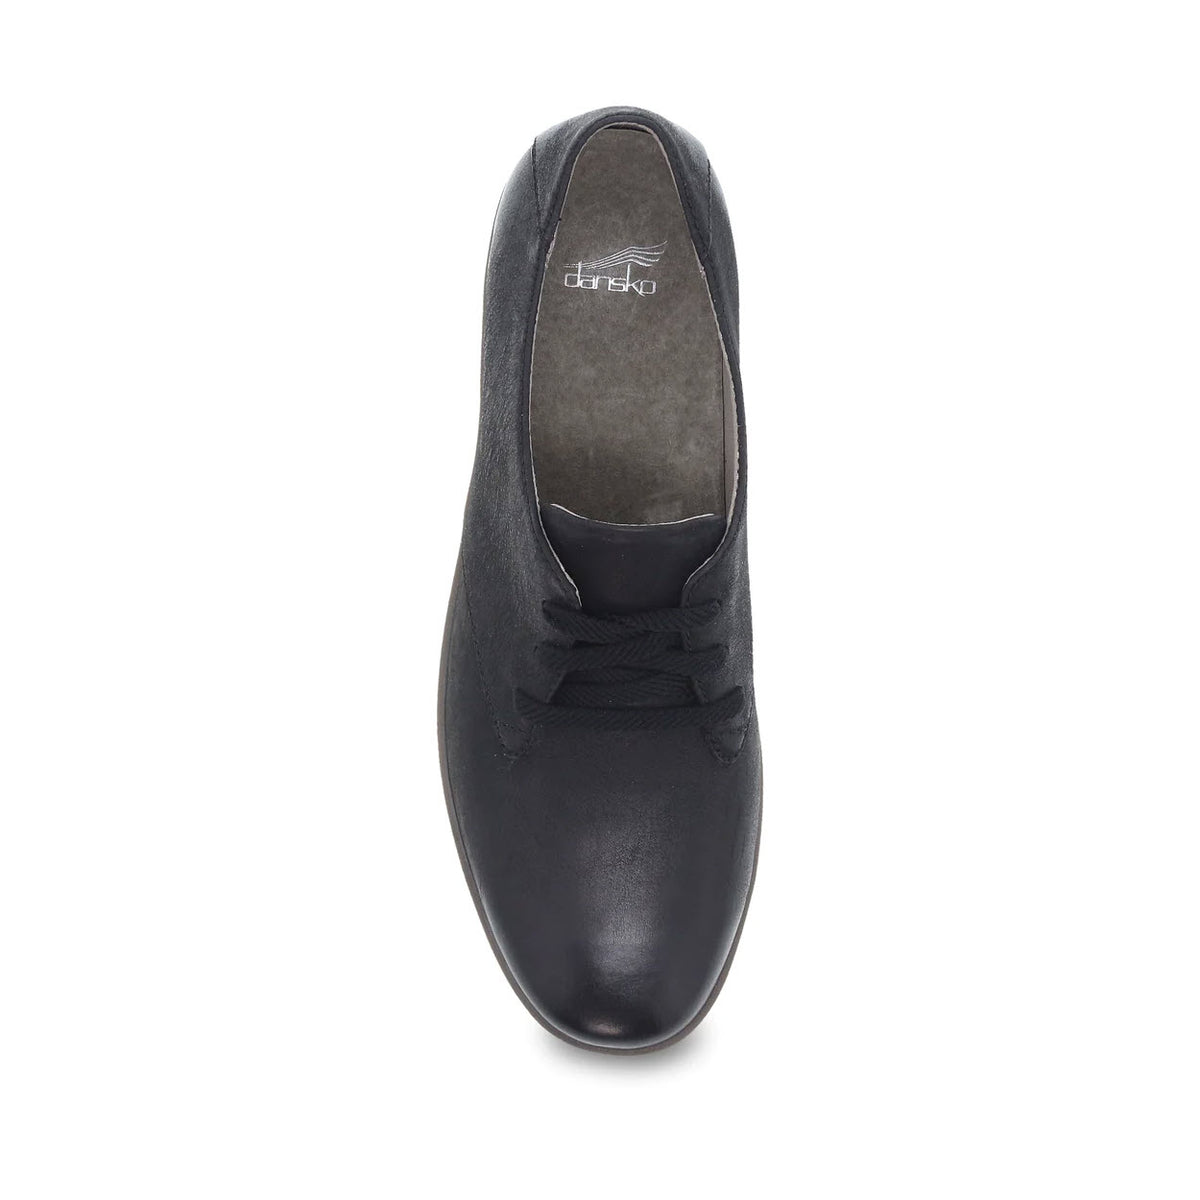 Top view of a single black Dansko Libbie Black Burnished - Womens Oxford shoe with flexible construction on a white background.